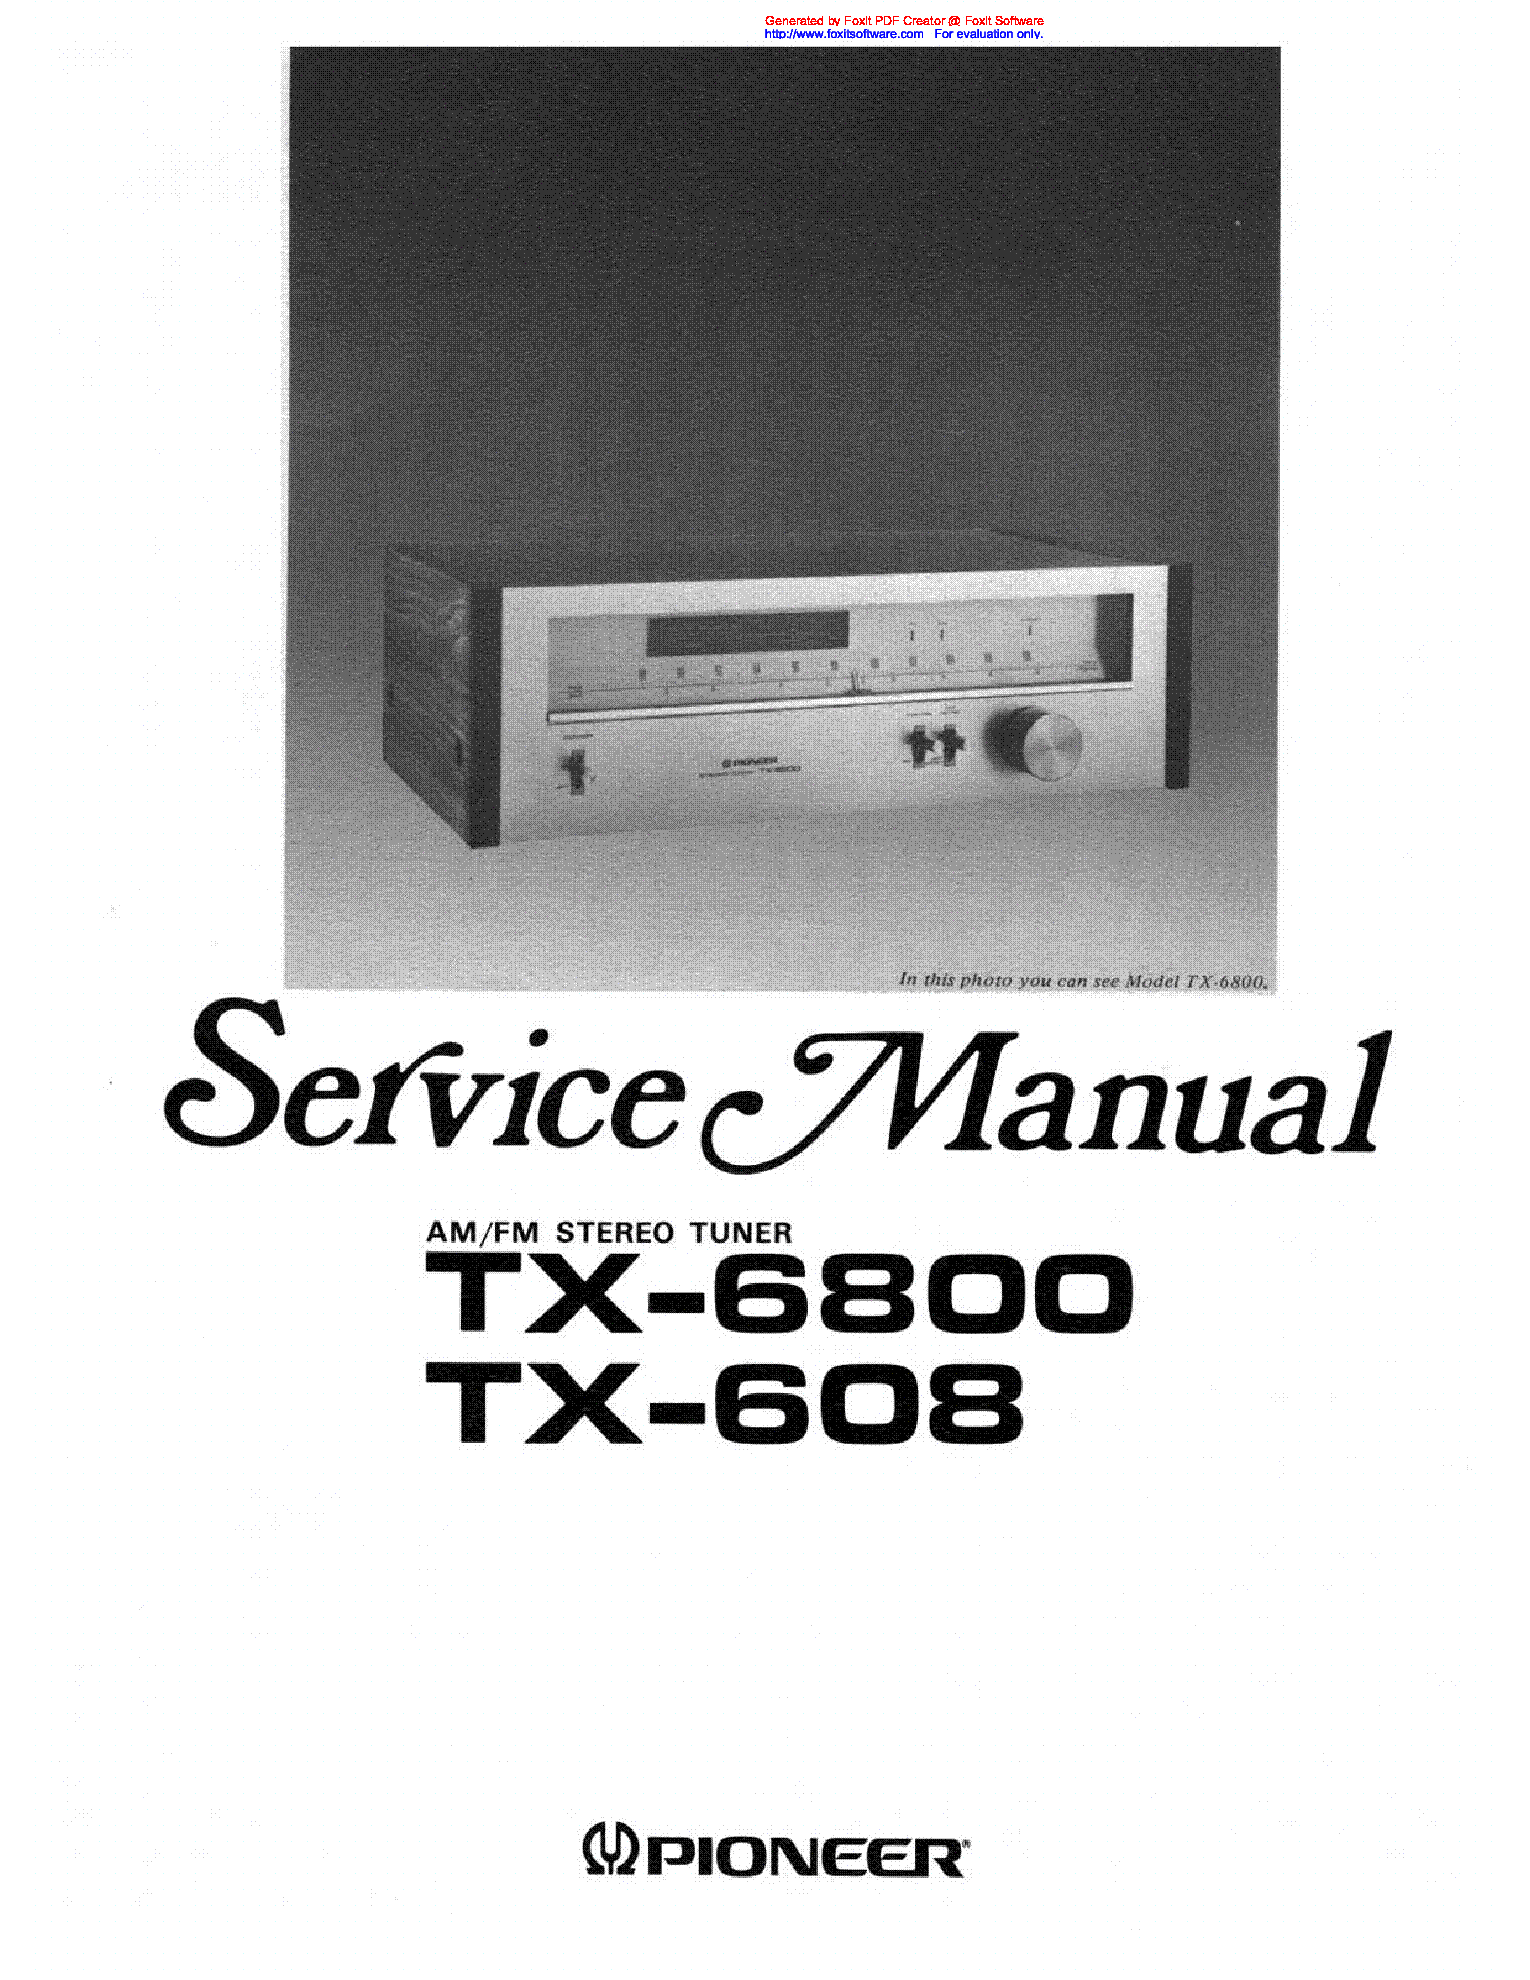 PIONEER TX-608 6800 service manual (1st page)